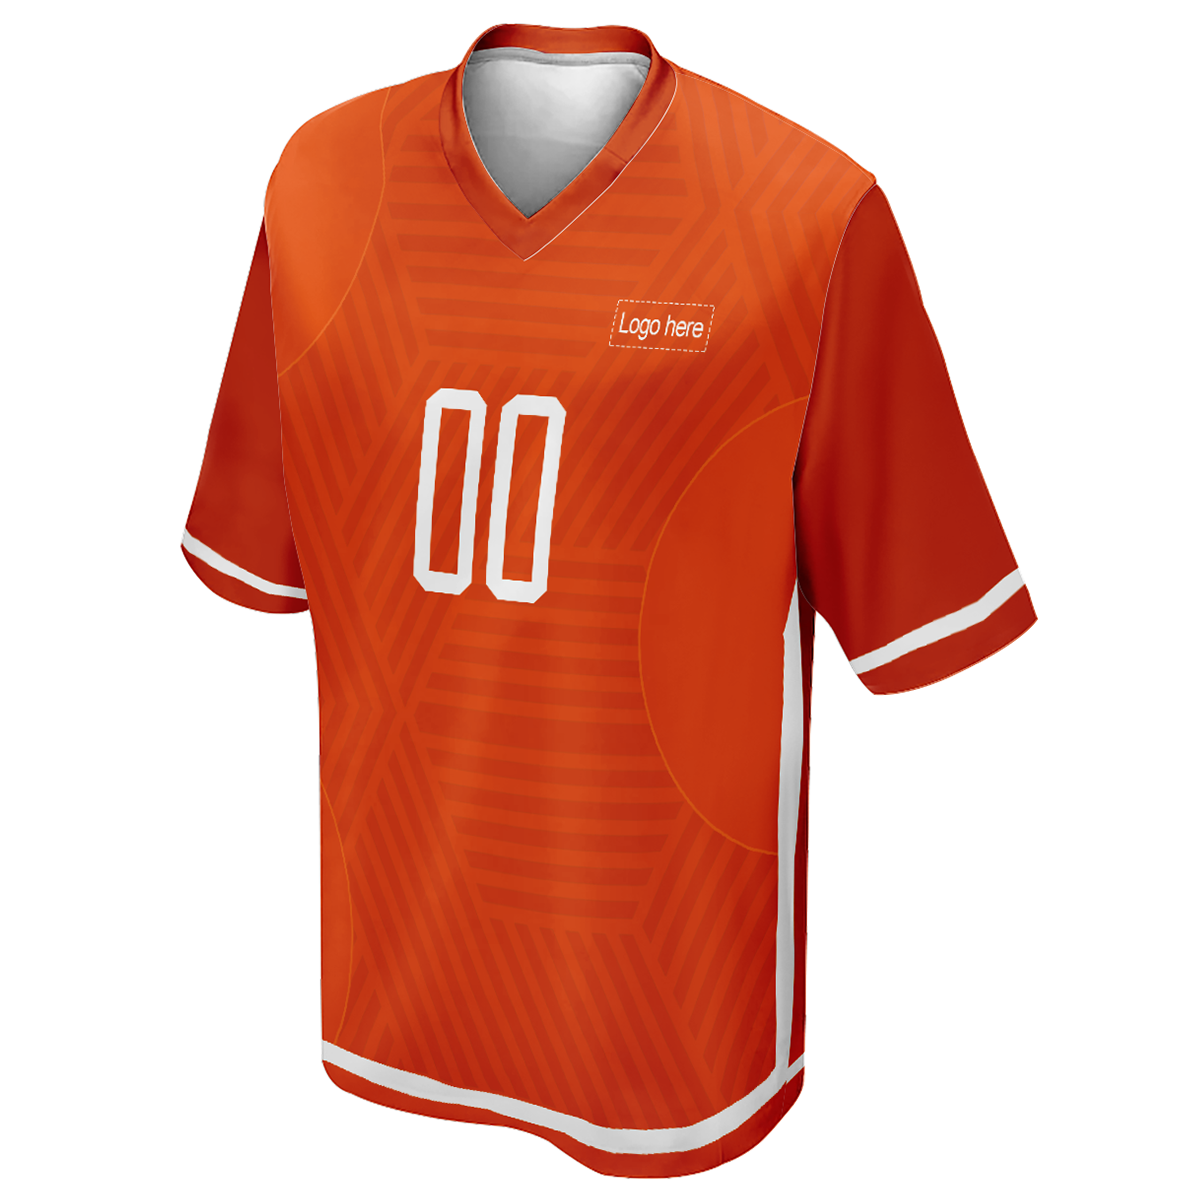 Men's Authentic Netherlands World Cup Custom Soccer Jersey With Picture